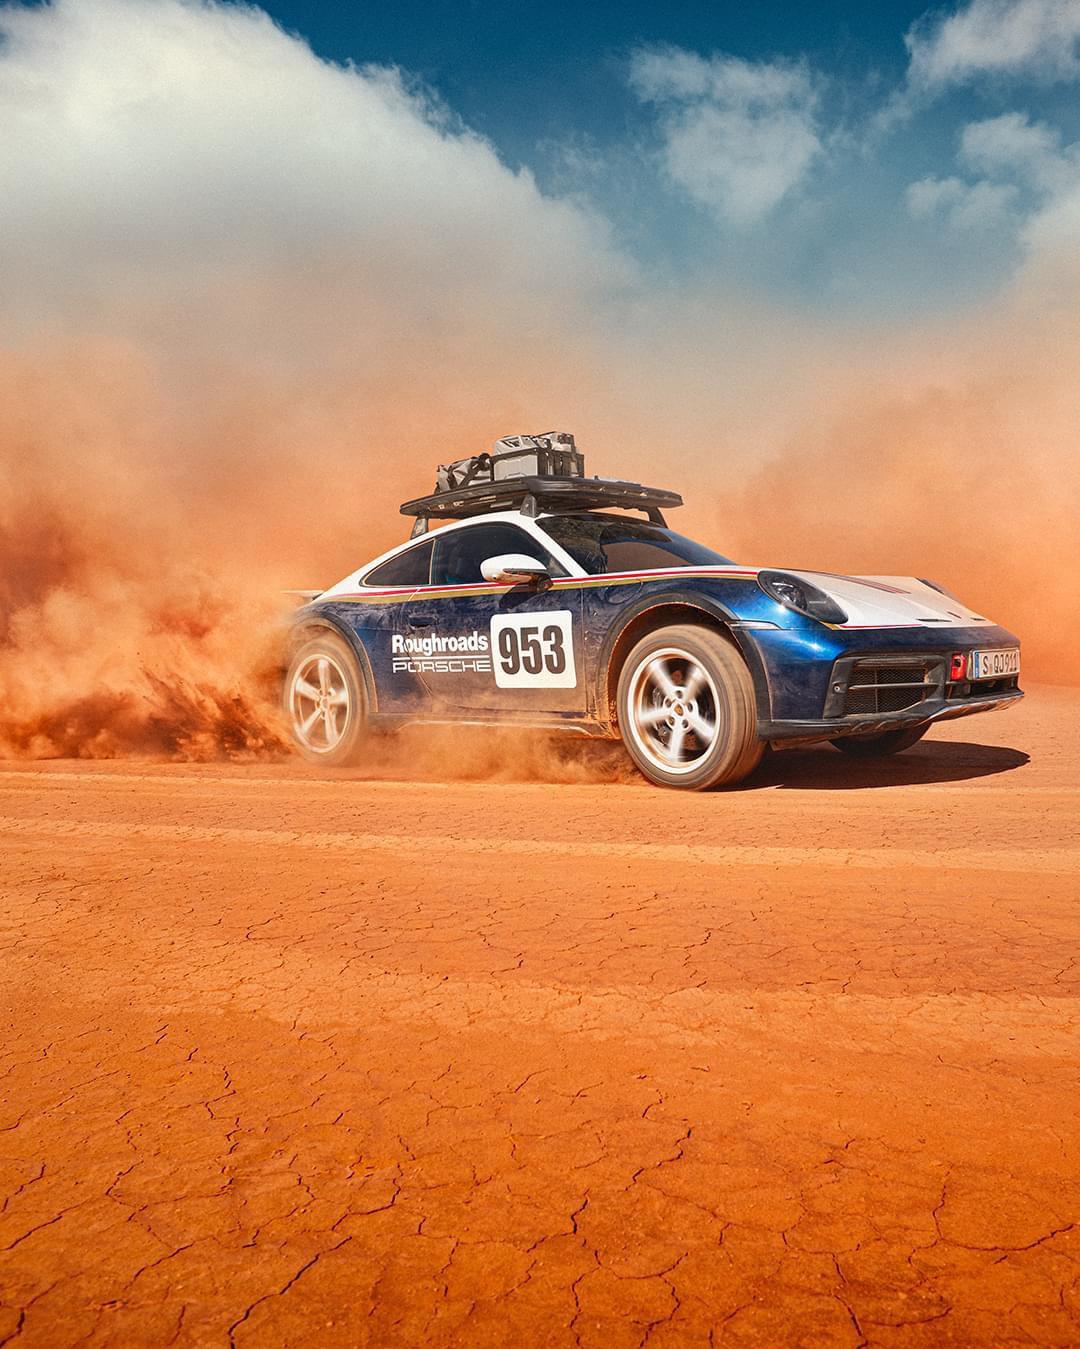 So What To Think About The New Porsche Dakar